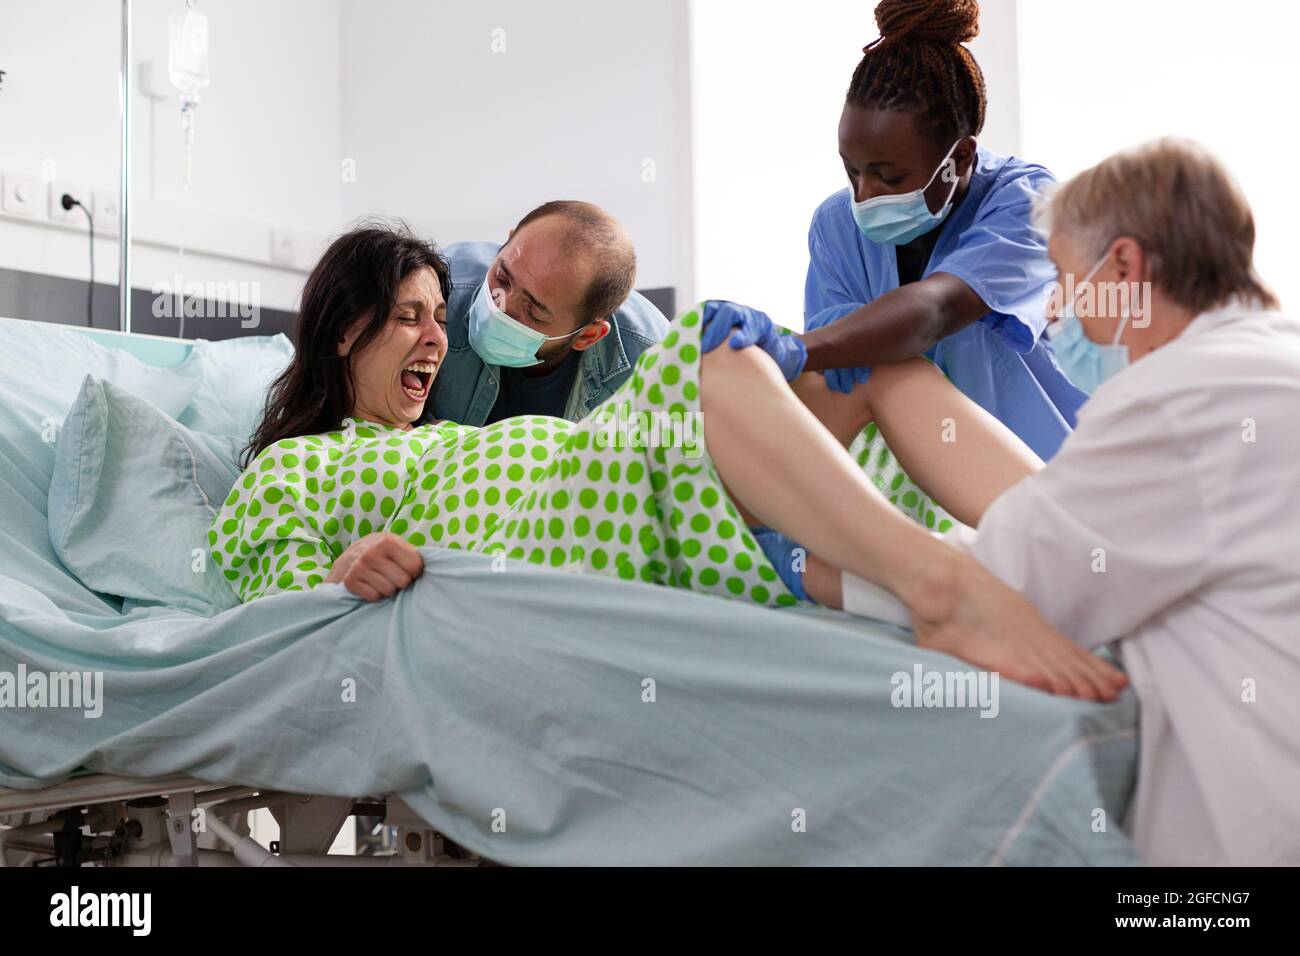 https://c8.alamy.com/comp/2GFCNG7/pregnant-woman-in-painful-labor-giving-birth-to-child-at-maternity-clinic-obstetrician-and-black-nurse-assisting-childbirth-and-helping-young-mother-with-delivery-in-hospital-ward-2GFCNG7.jpg